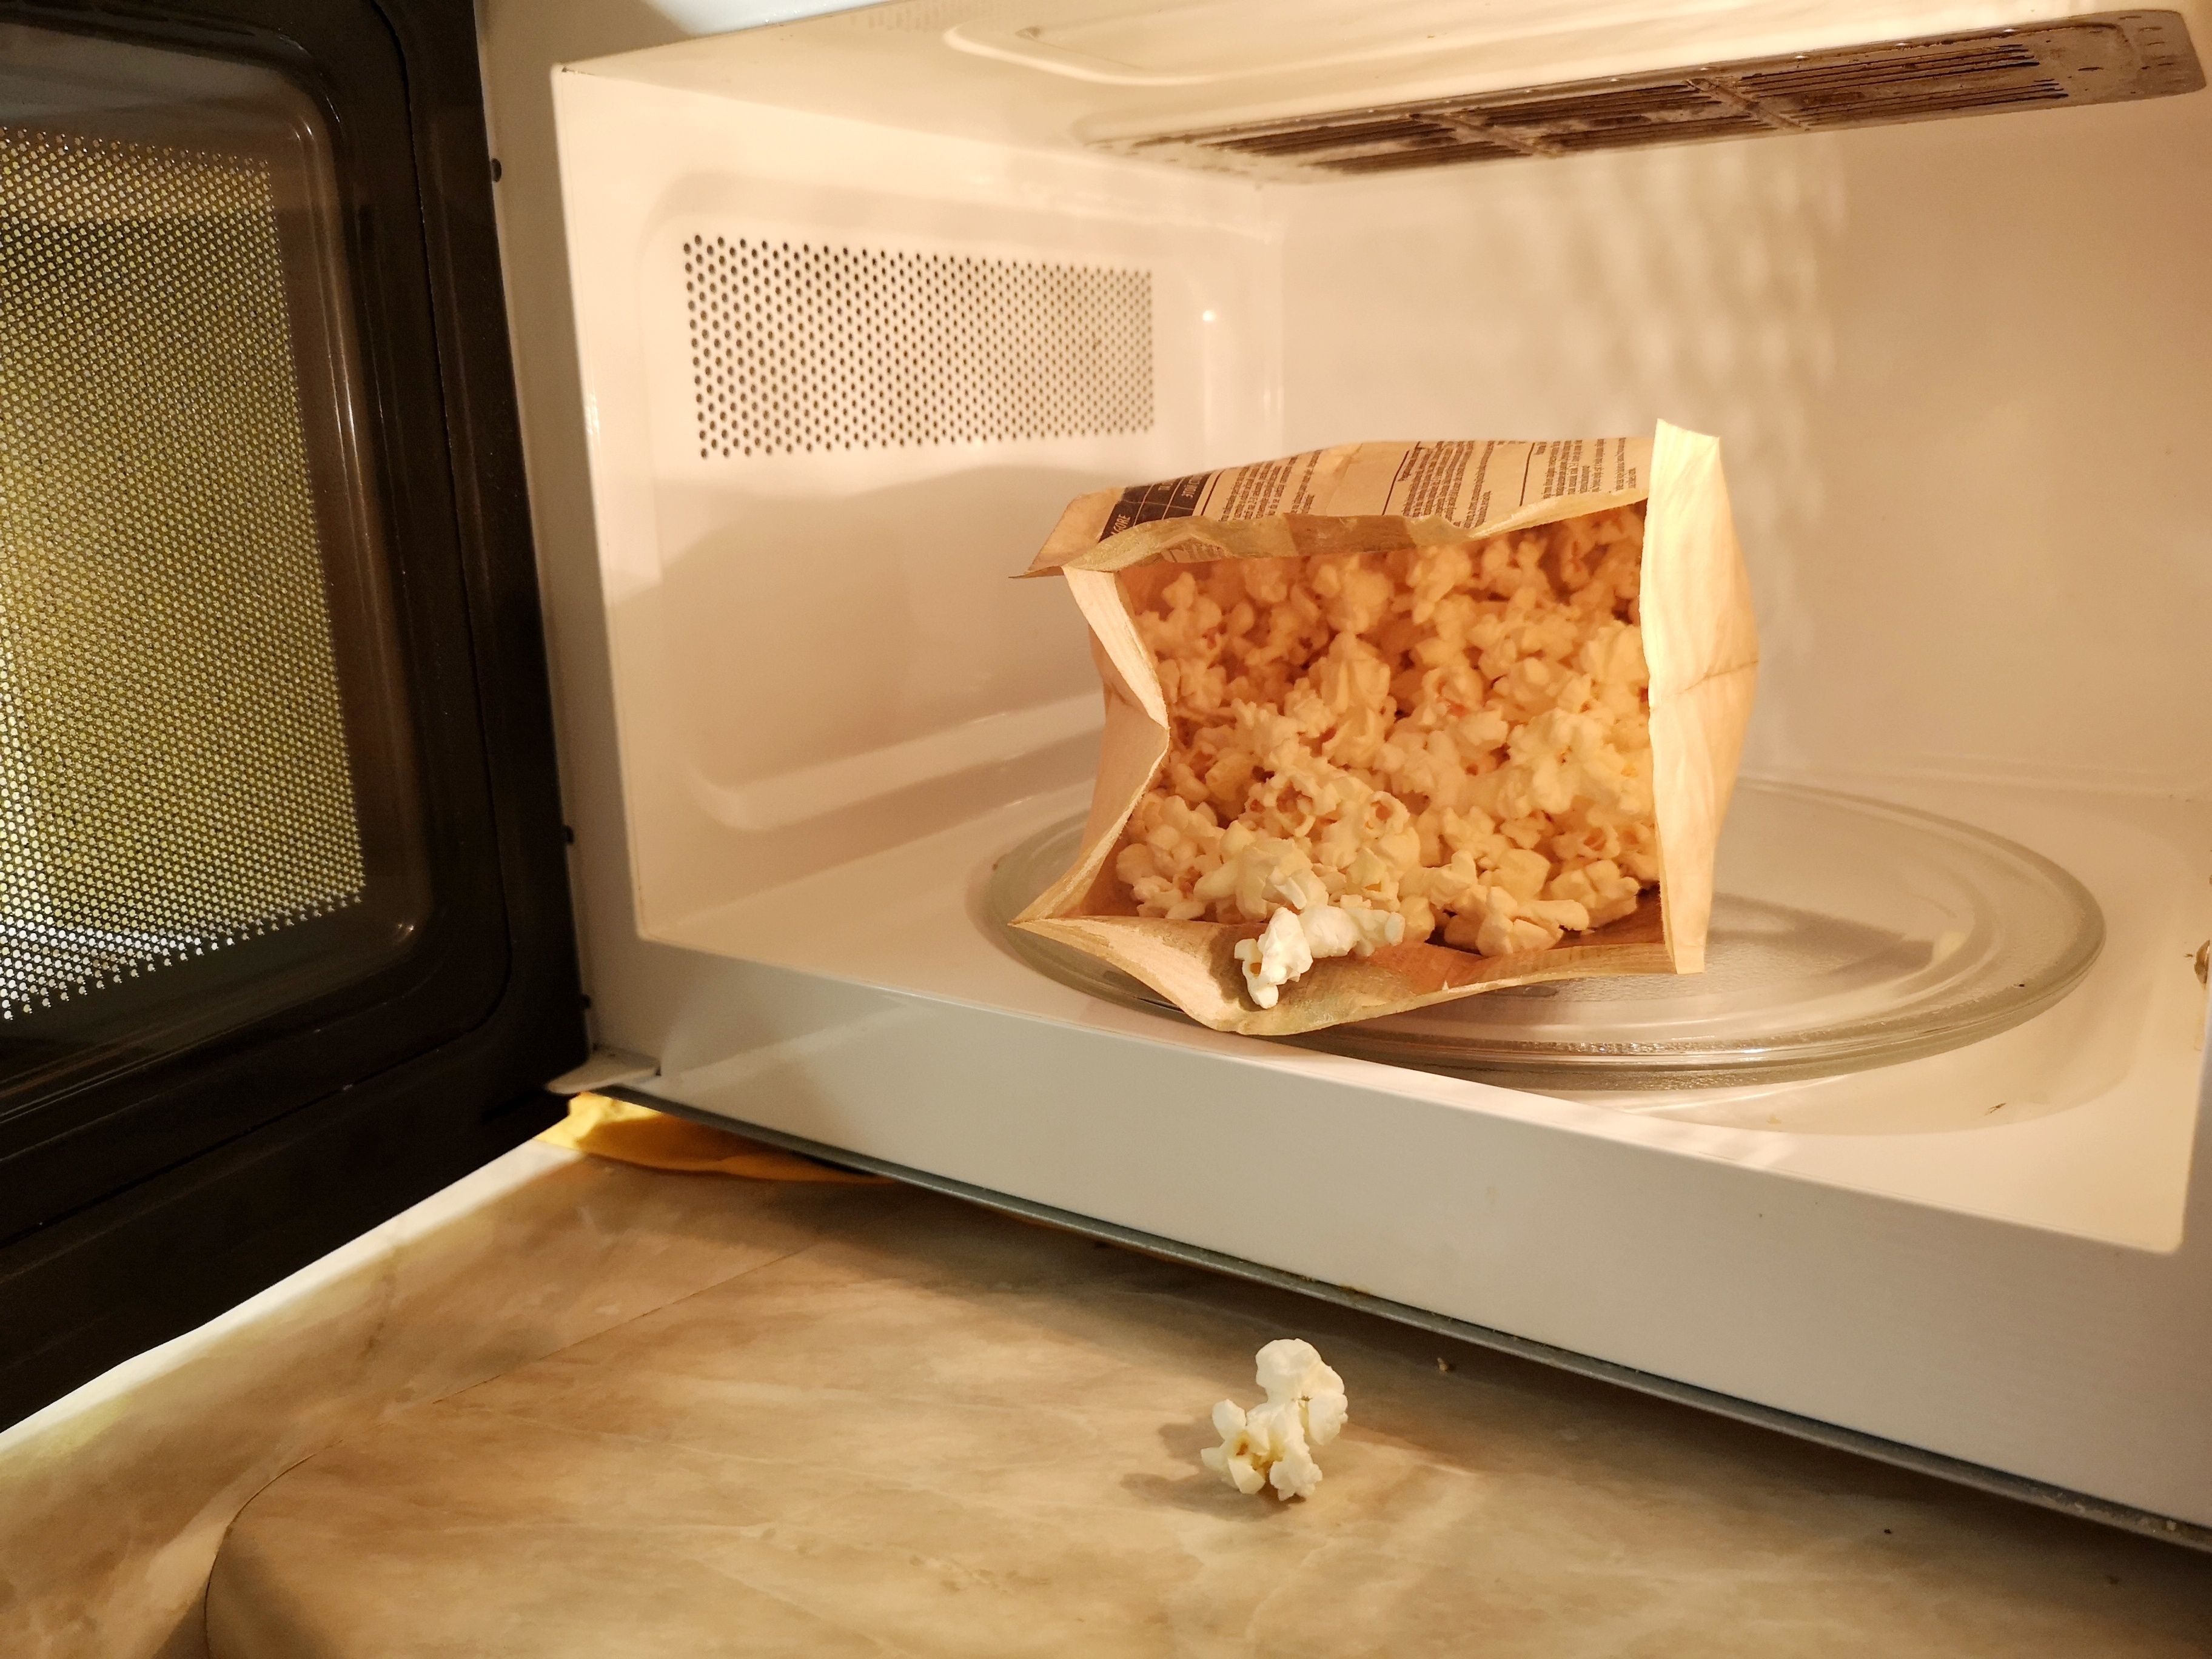 4 Reasons Stovetop Popcorn Will Always Be Better Than Microwaved